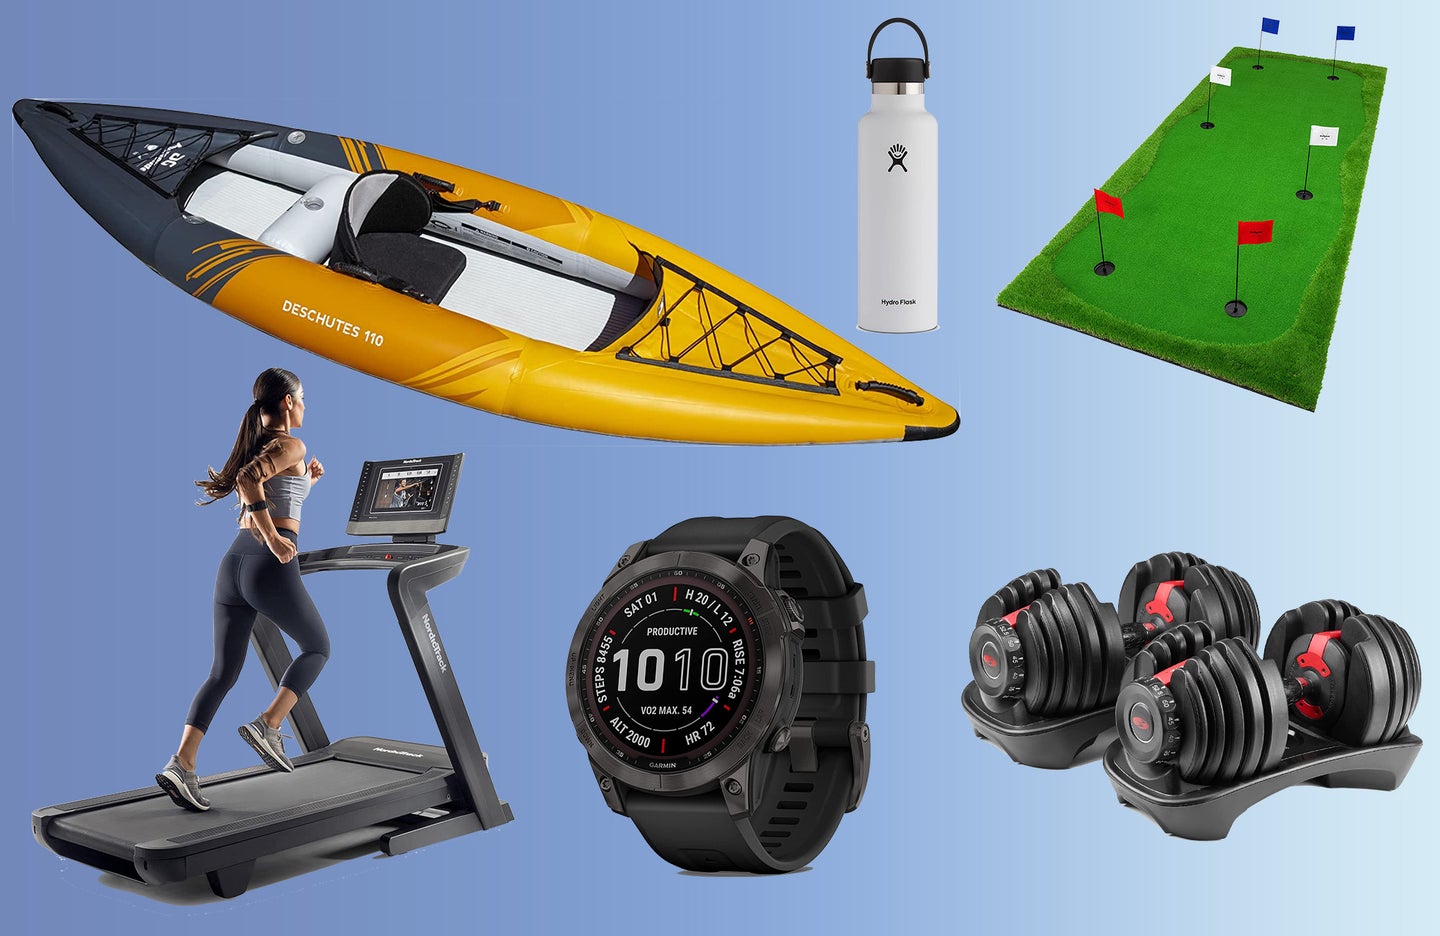 Save big on gear with these Memorial Day fitness deals.